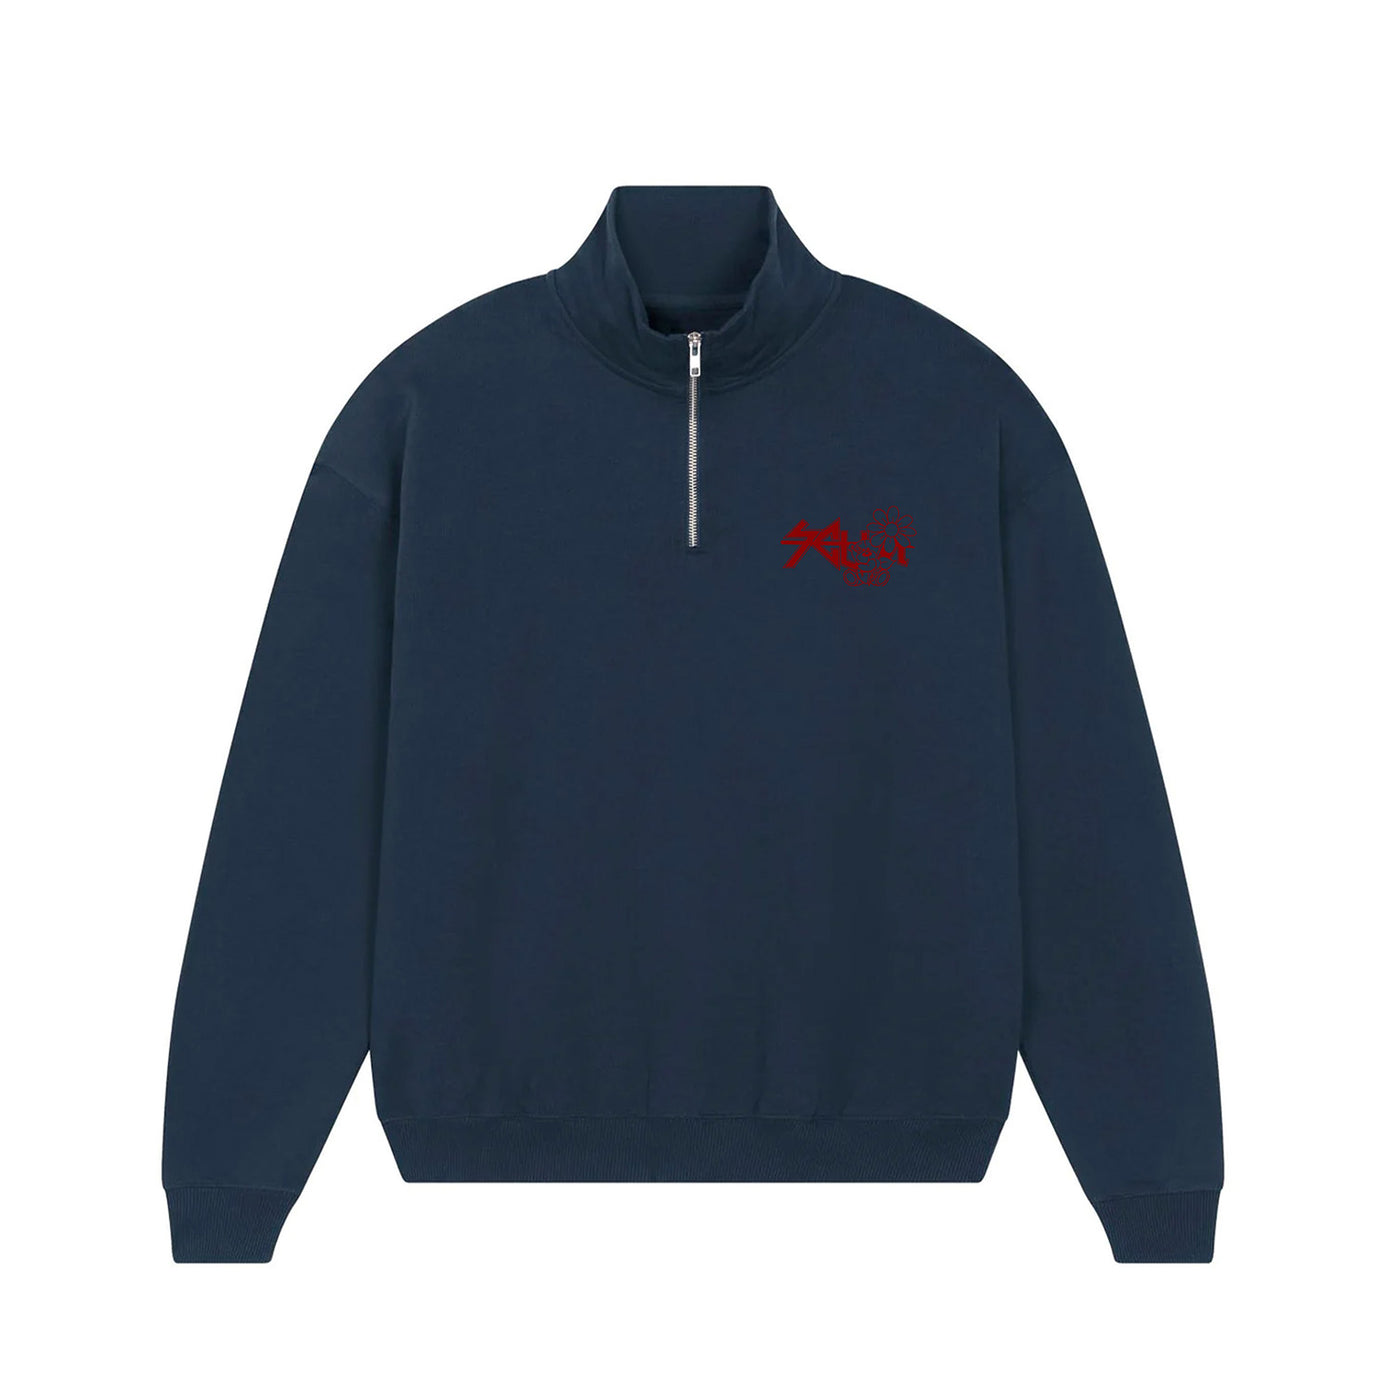 Zip-up mock up french navy